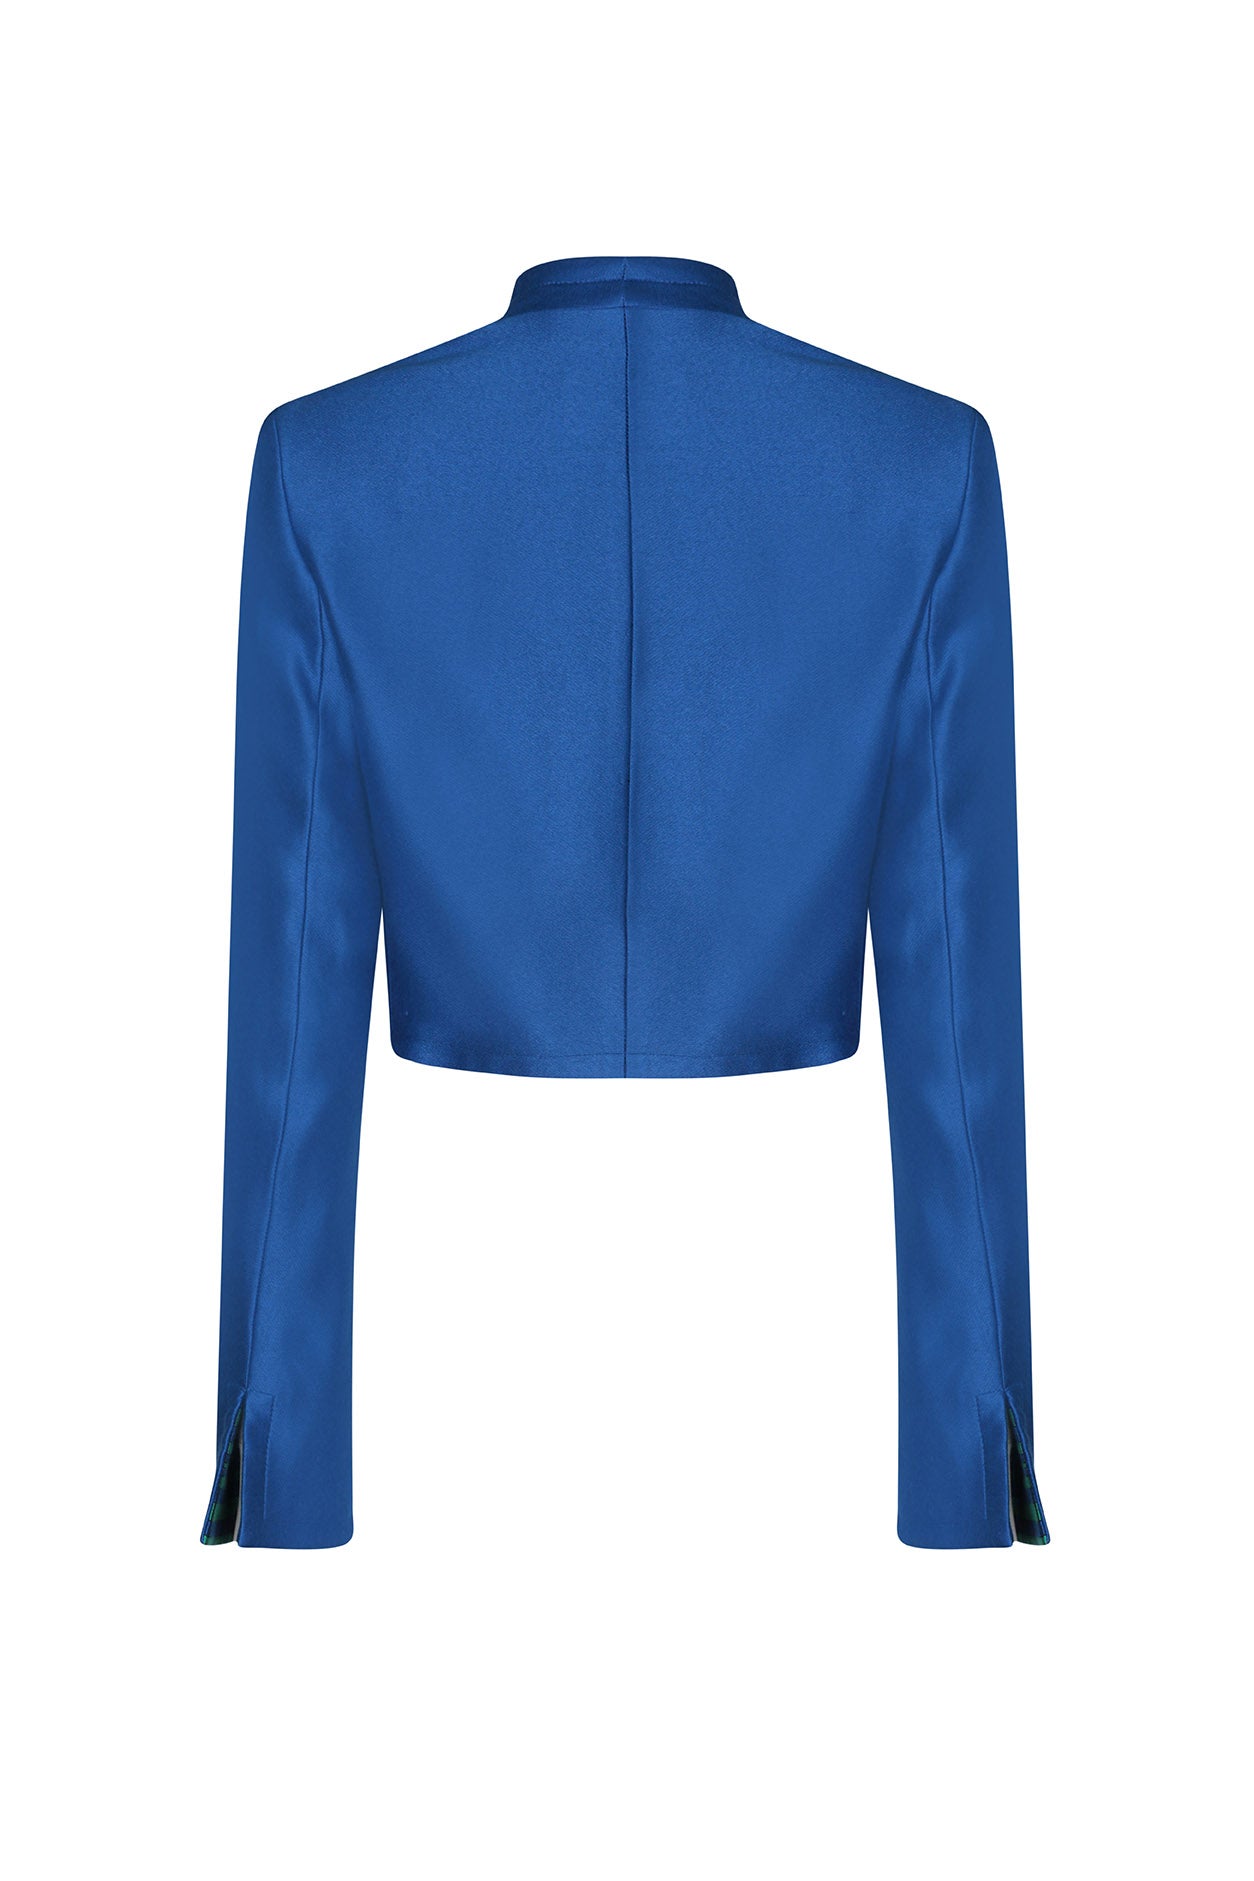 Short Jacket in Royal Blue Viscose/Cotton Sateen with Check Contrast lapels - Hermione